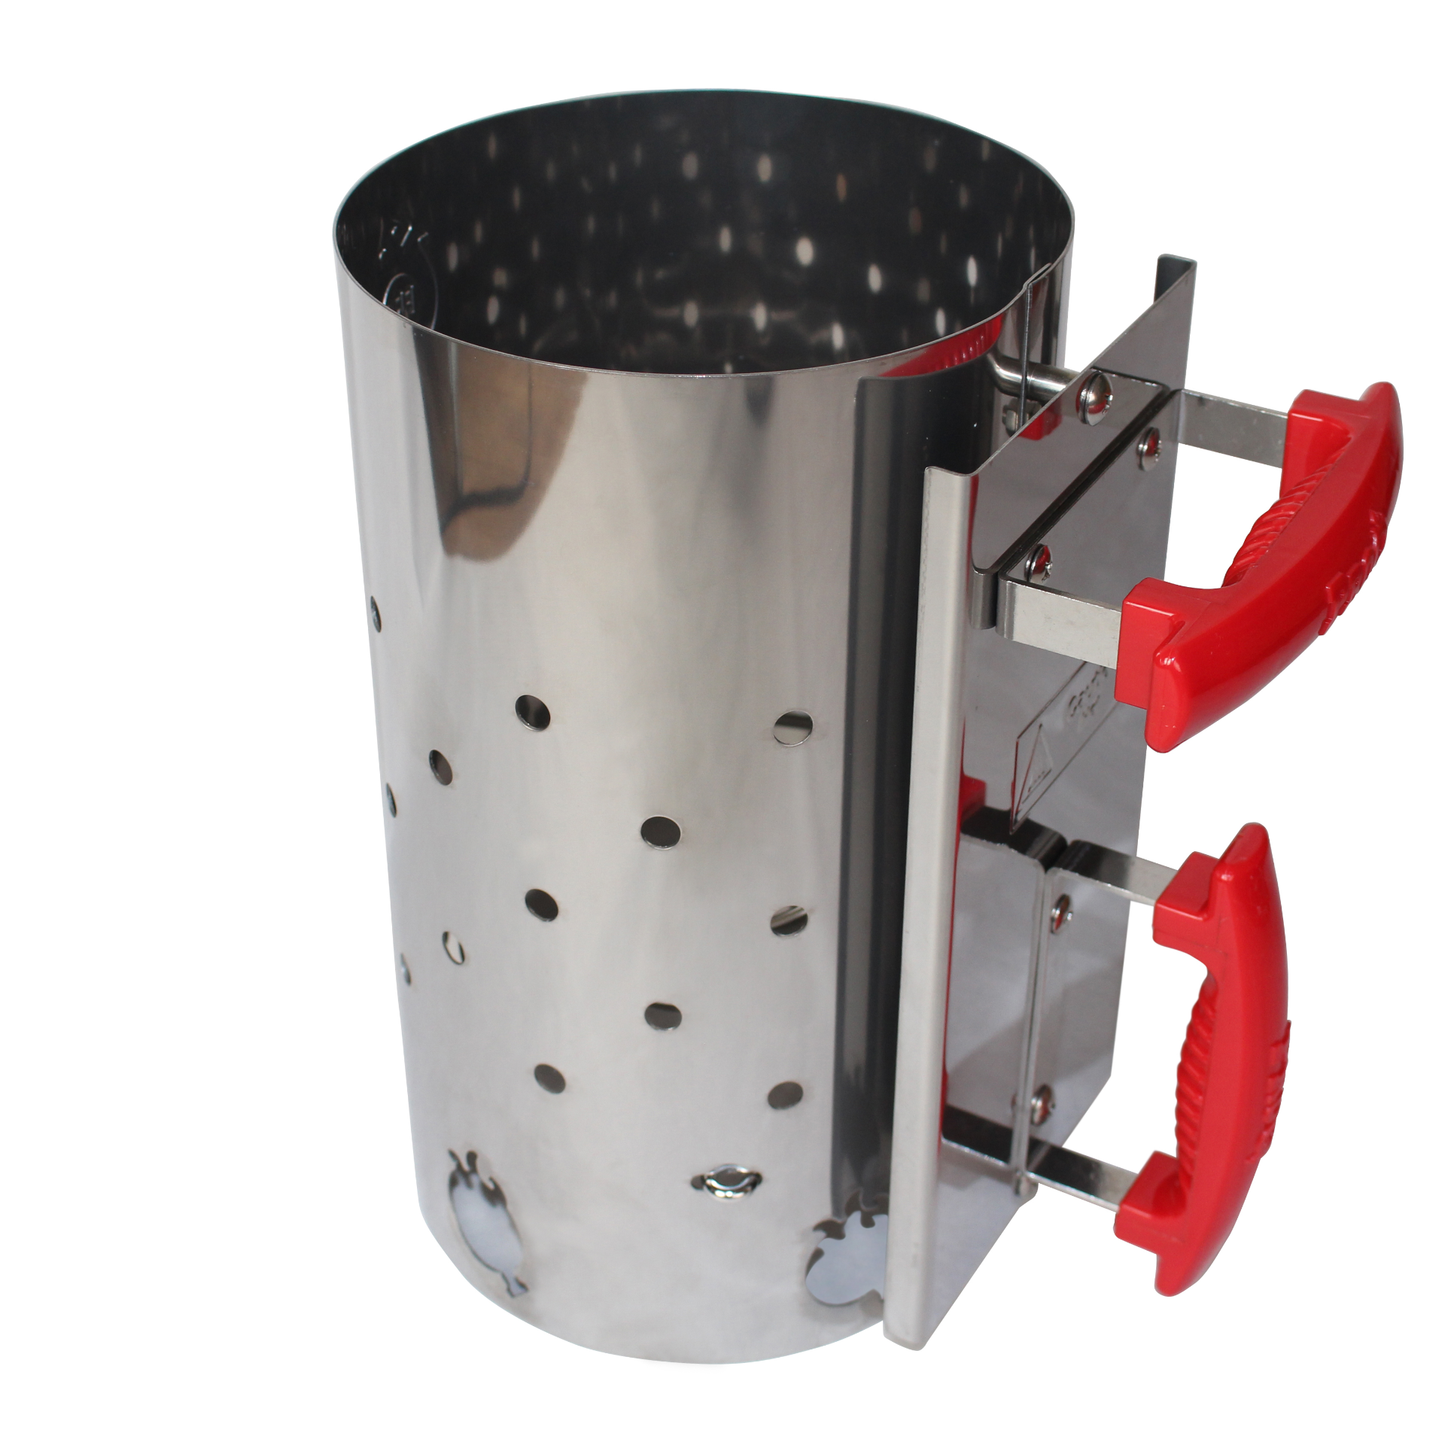 ProQ Charcoal Chimney Starter - Stainless Steel